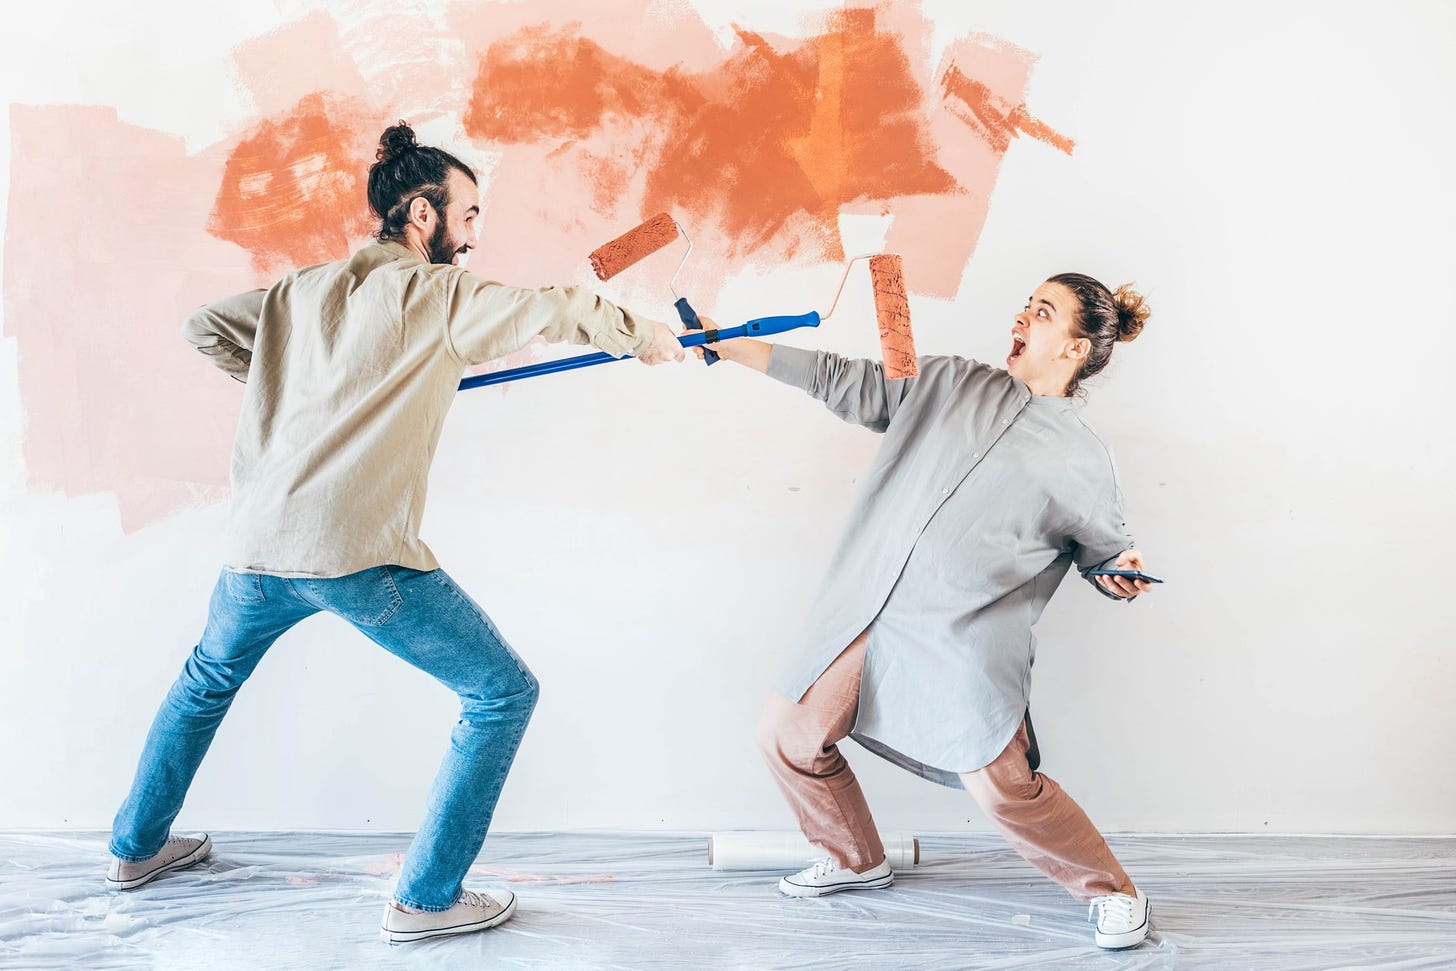 A man playfully stretches a paint roller towards his partner, who looks suprised.